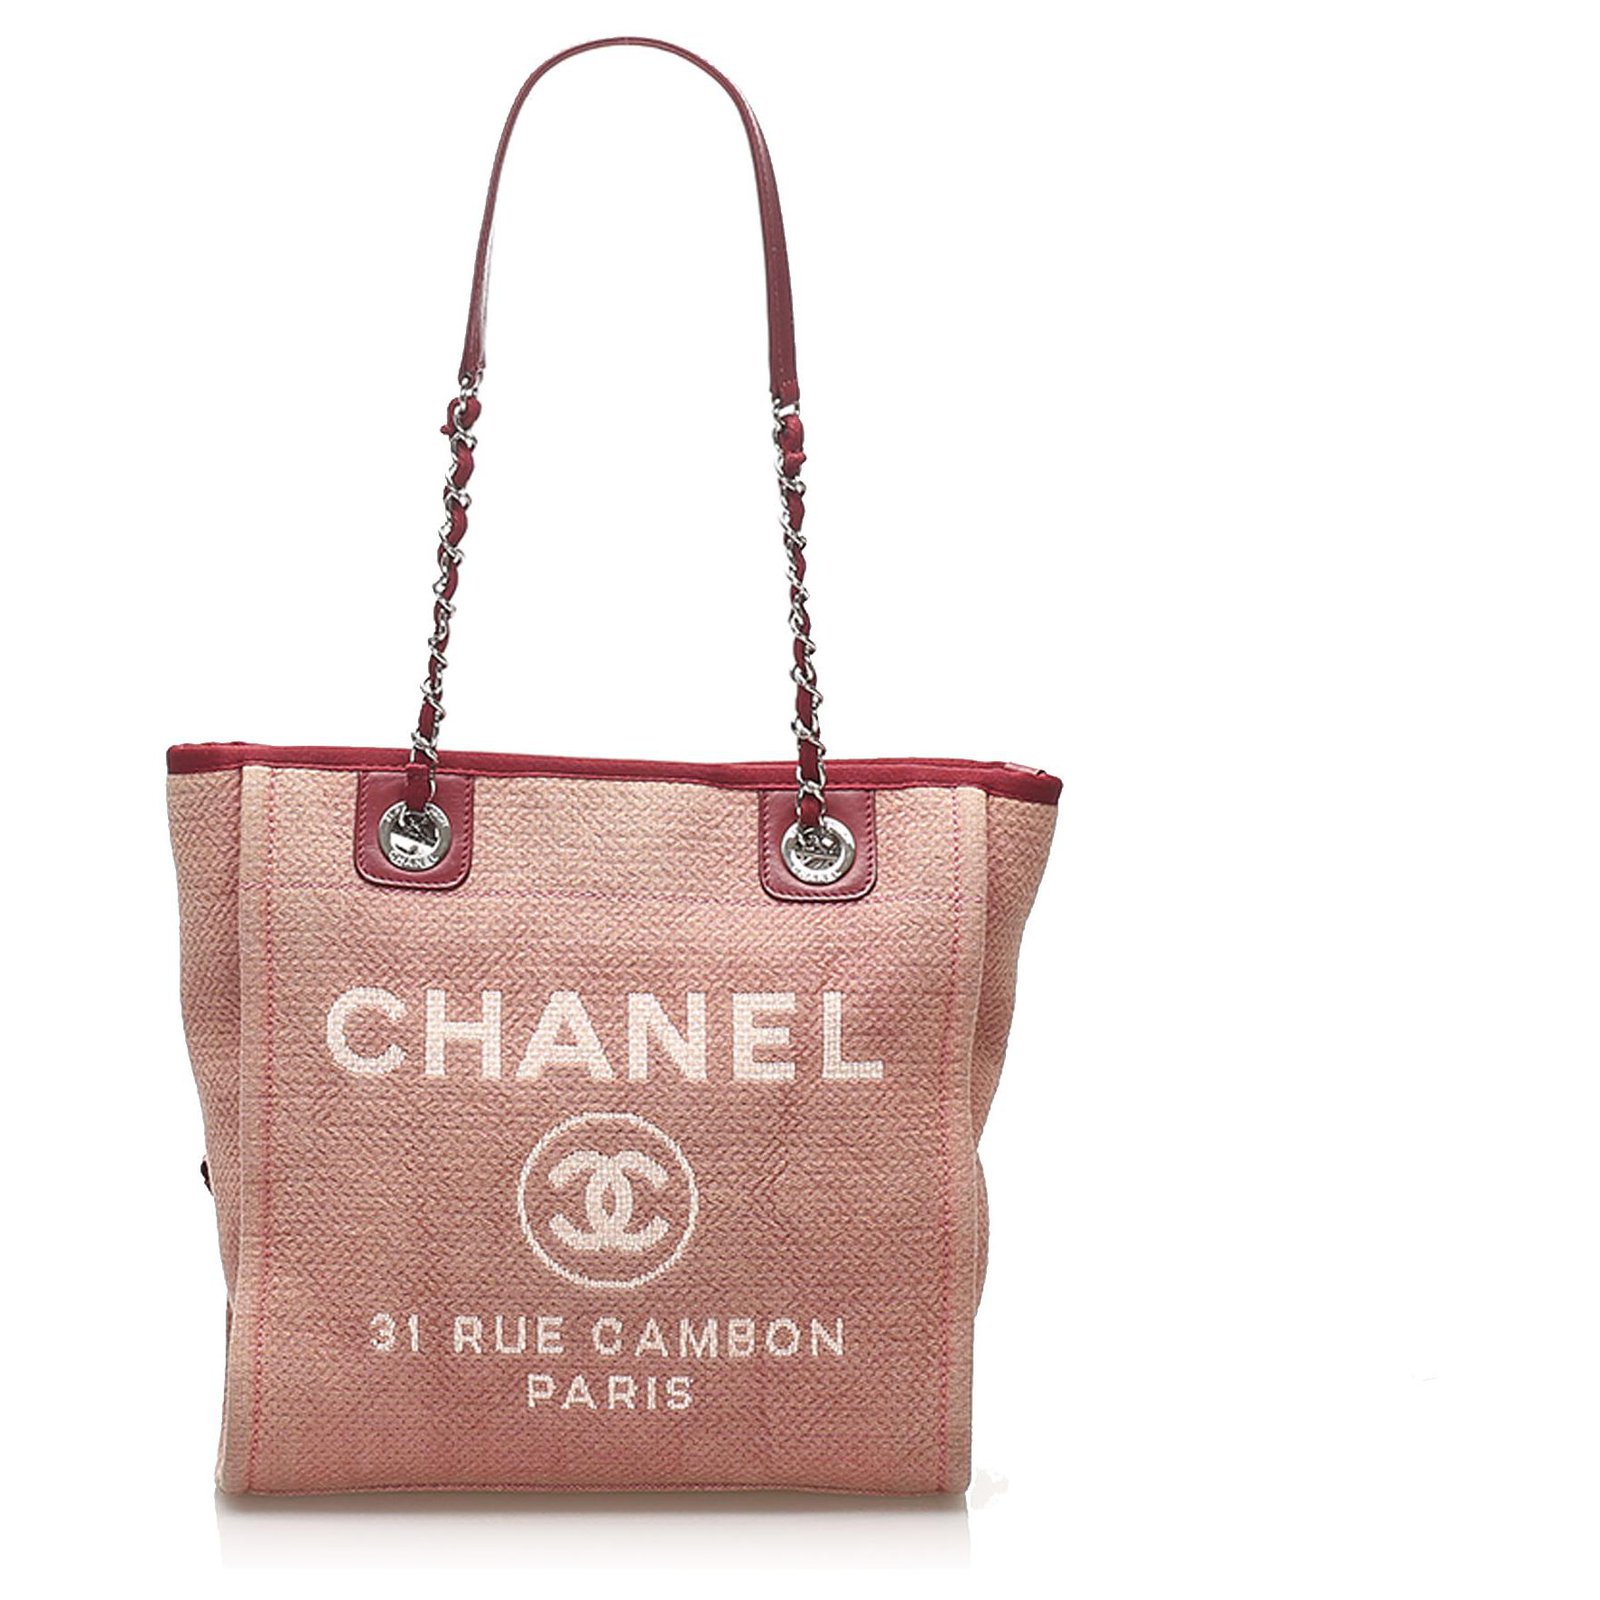 Chanel Pink Deauville Canvas Tote Bag Leather Cloth Pony-style